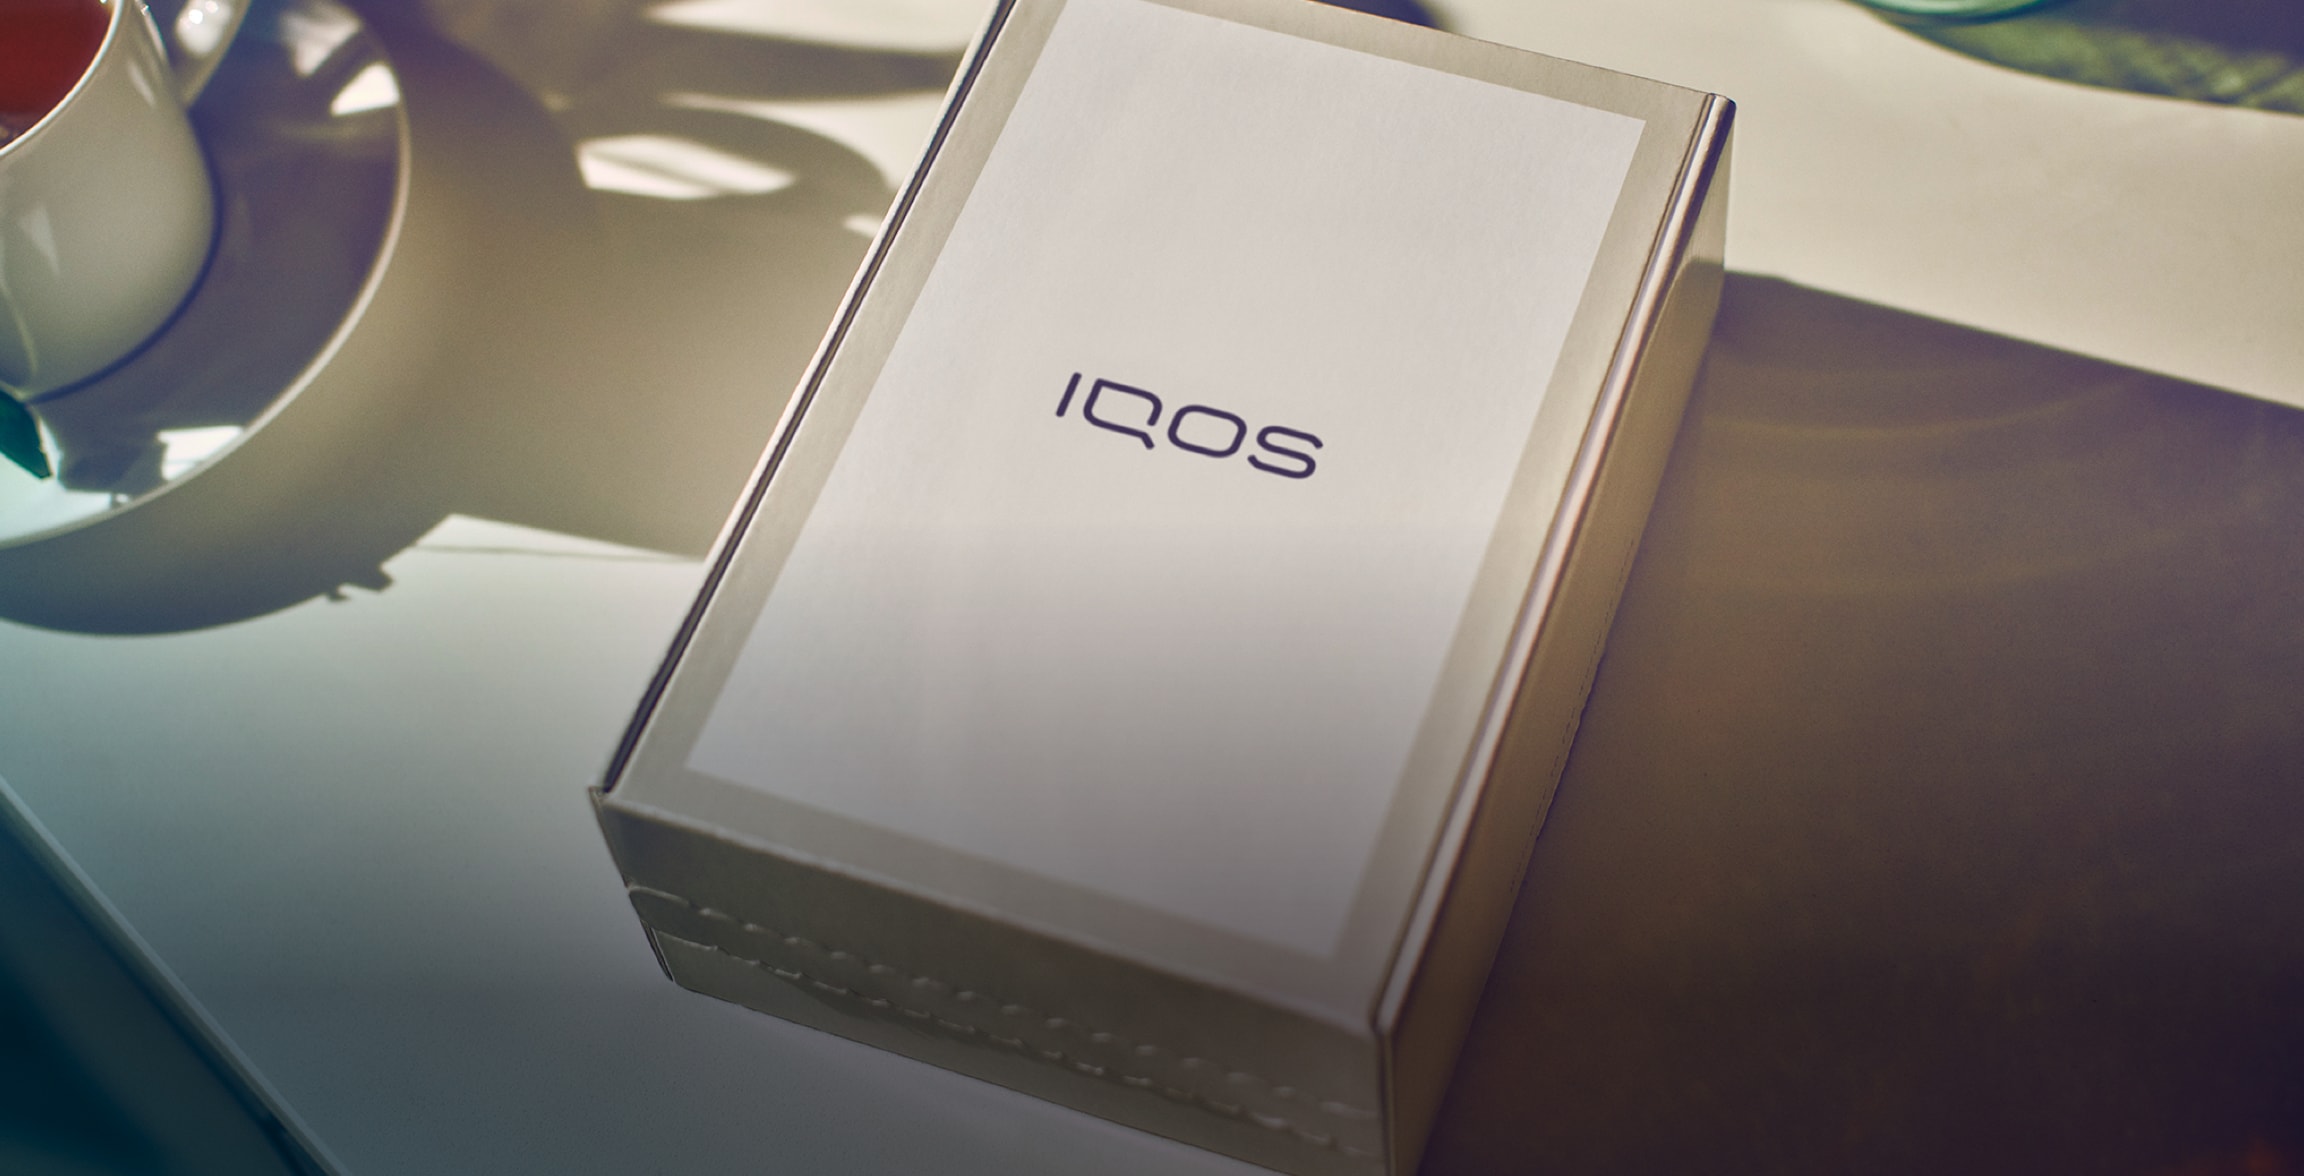 Hands holding an IQOS box.